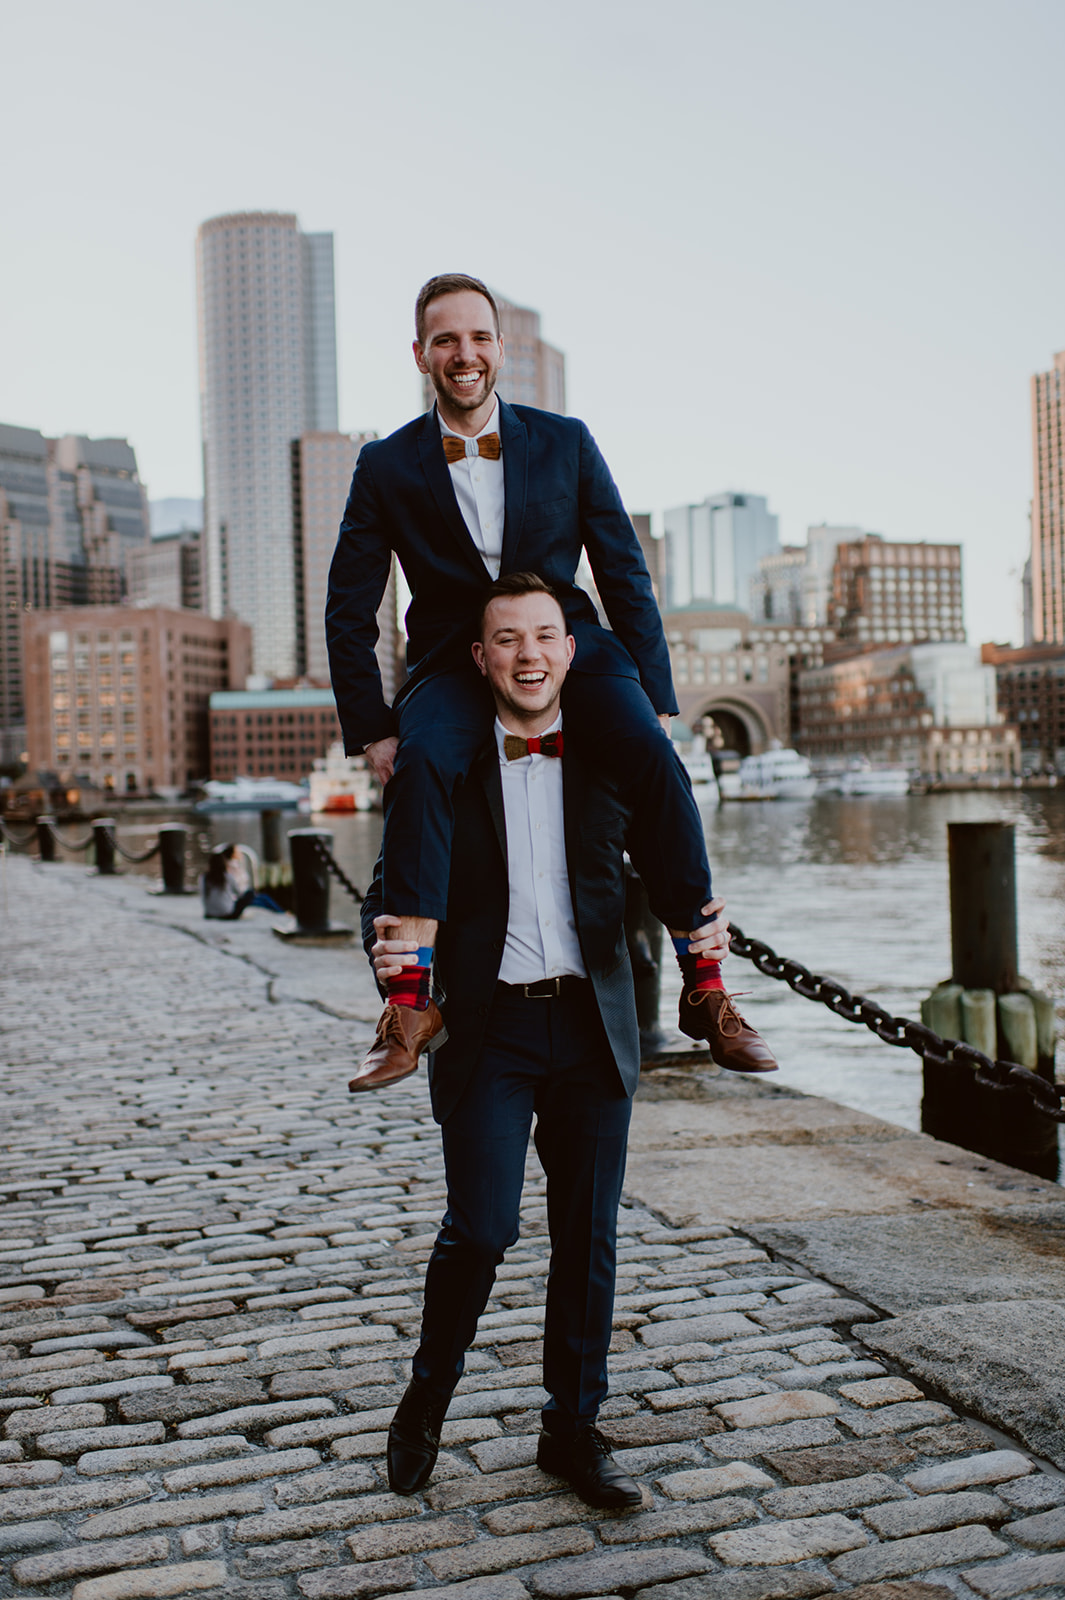 Boston engagement session with bow ties and an adorable pup | Kaila Sarene Photography | Featured on Equally Wed, the leading LGBTQ+ wedding magazine